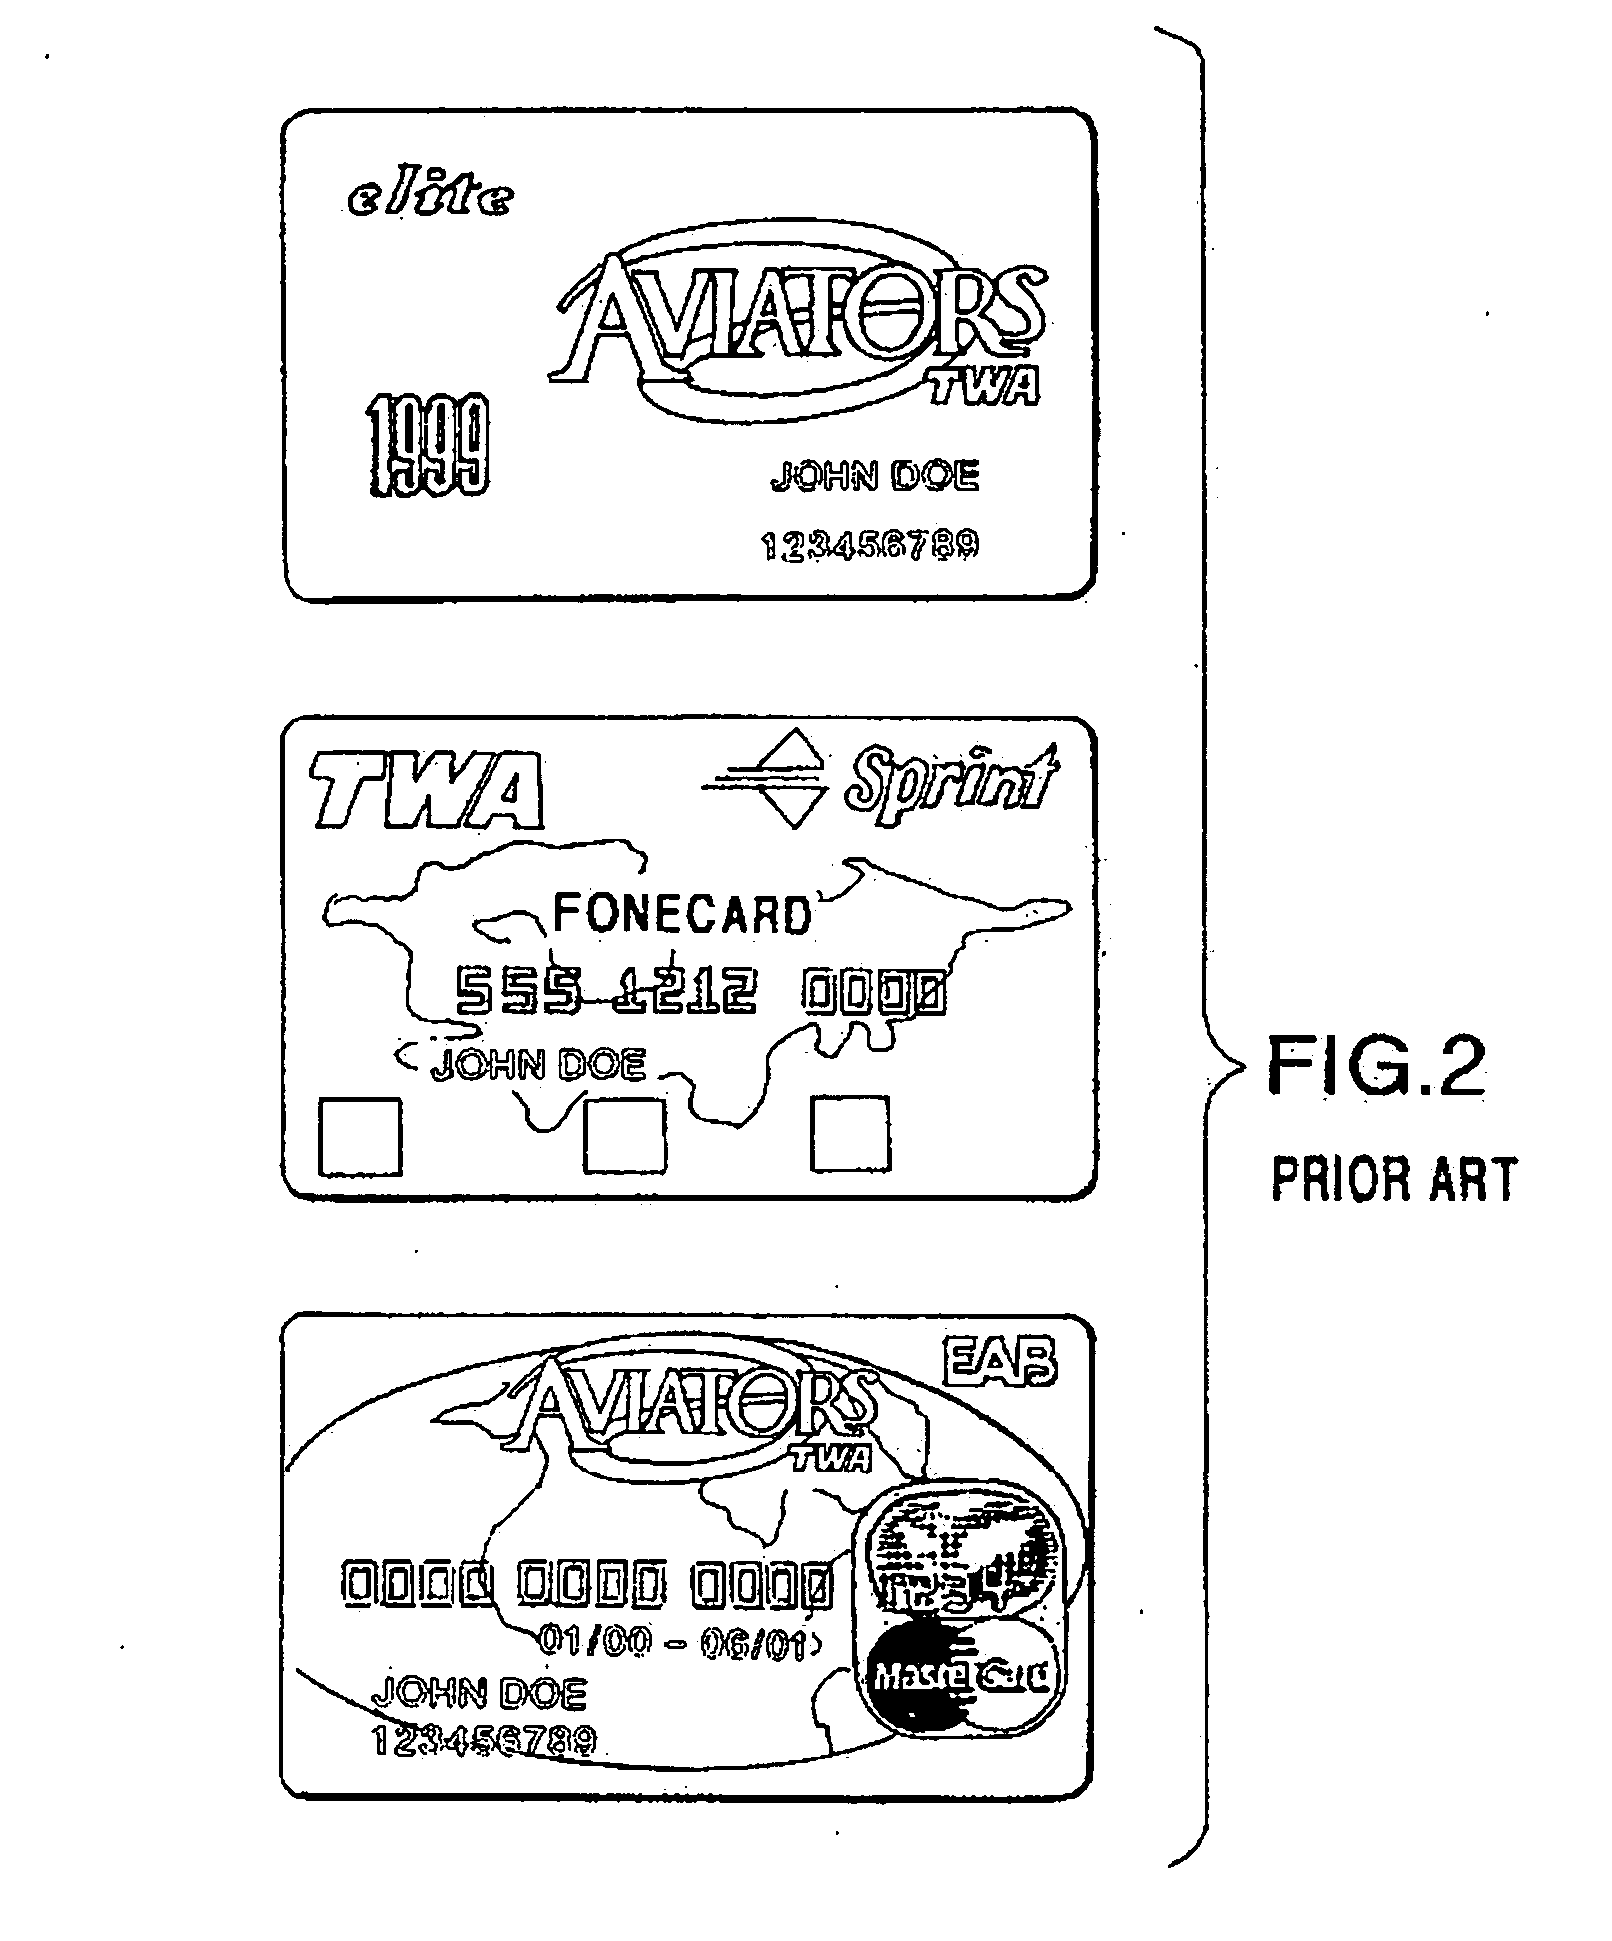 Method and system for using reward points to liquidate products